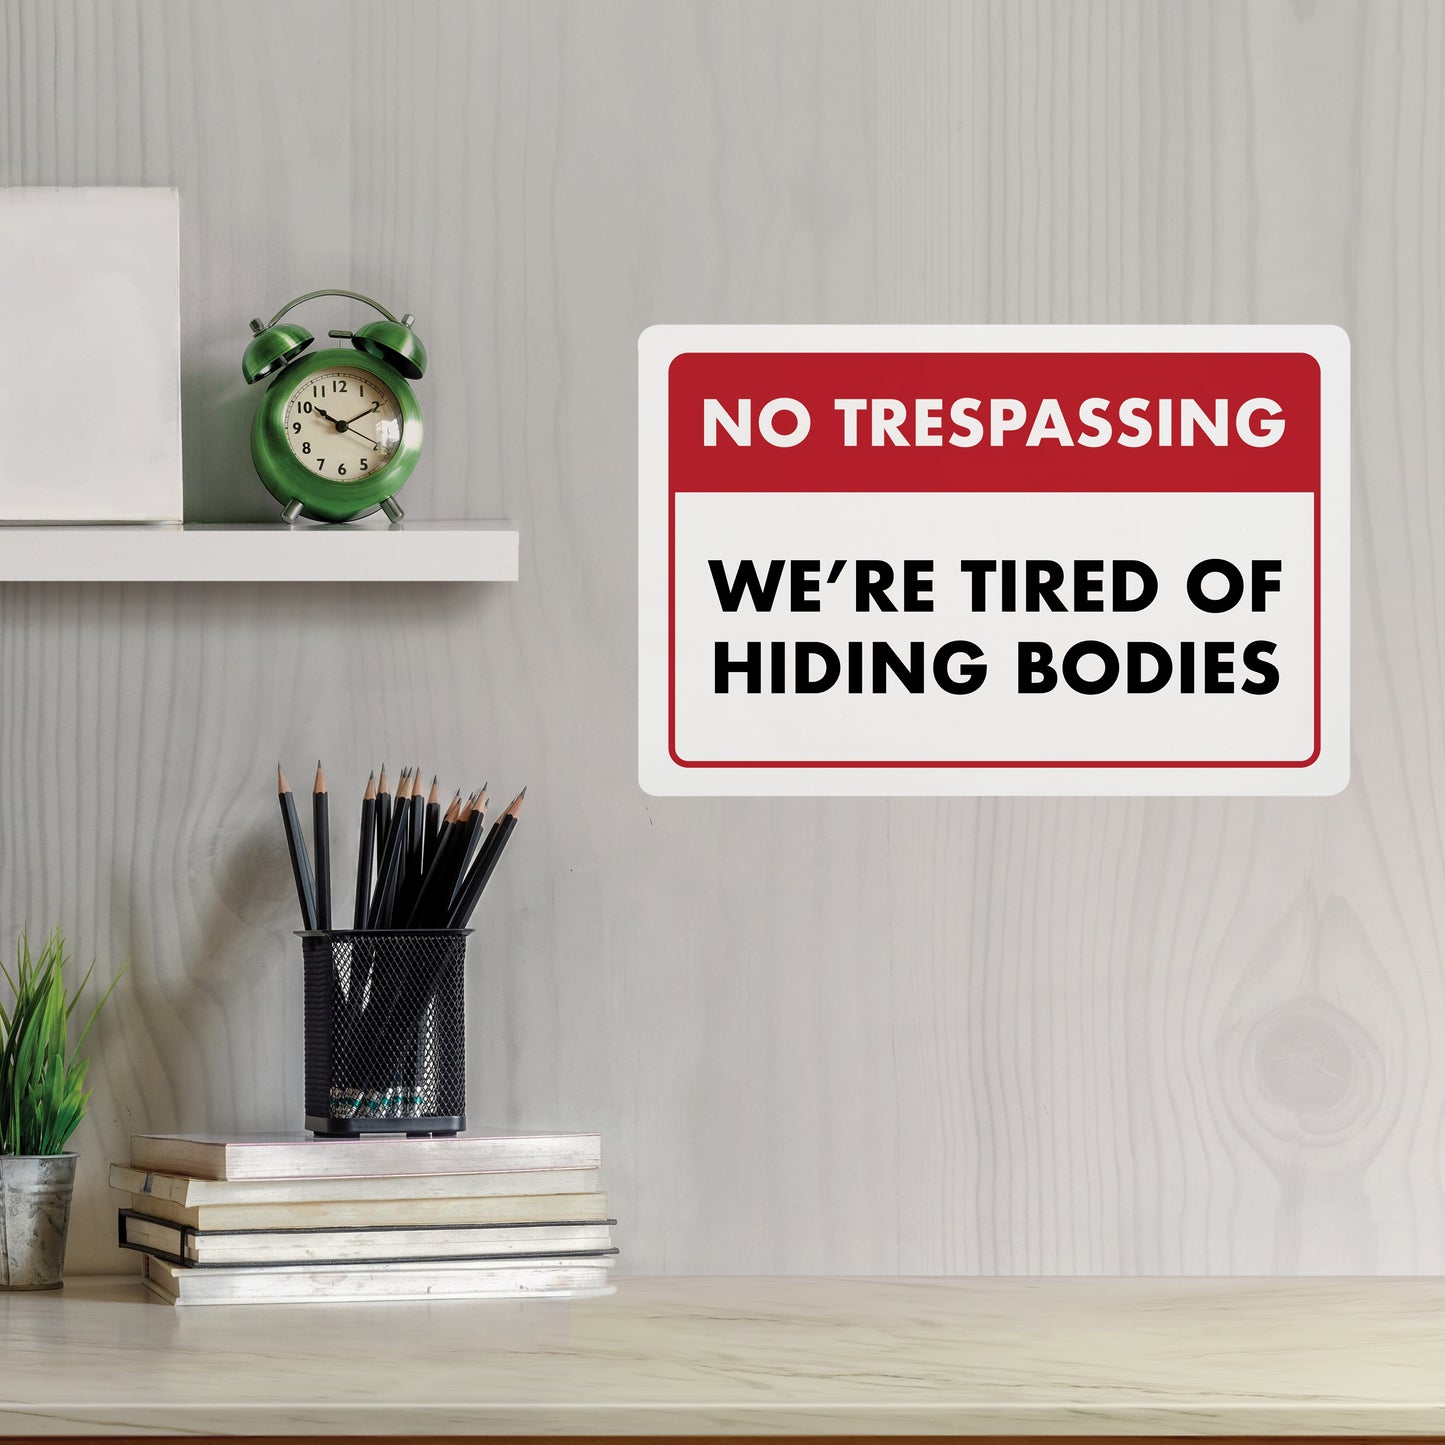 No Trespassing - We're Tired of Hiding Bodies - 8" x 12" Funny Plastic (PVC) Sign